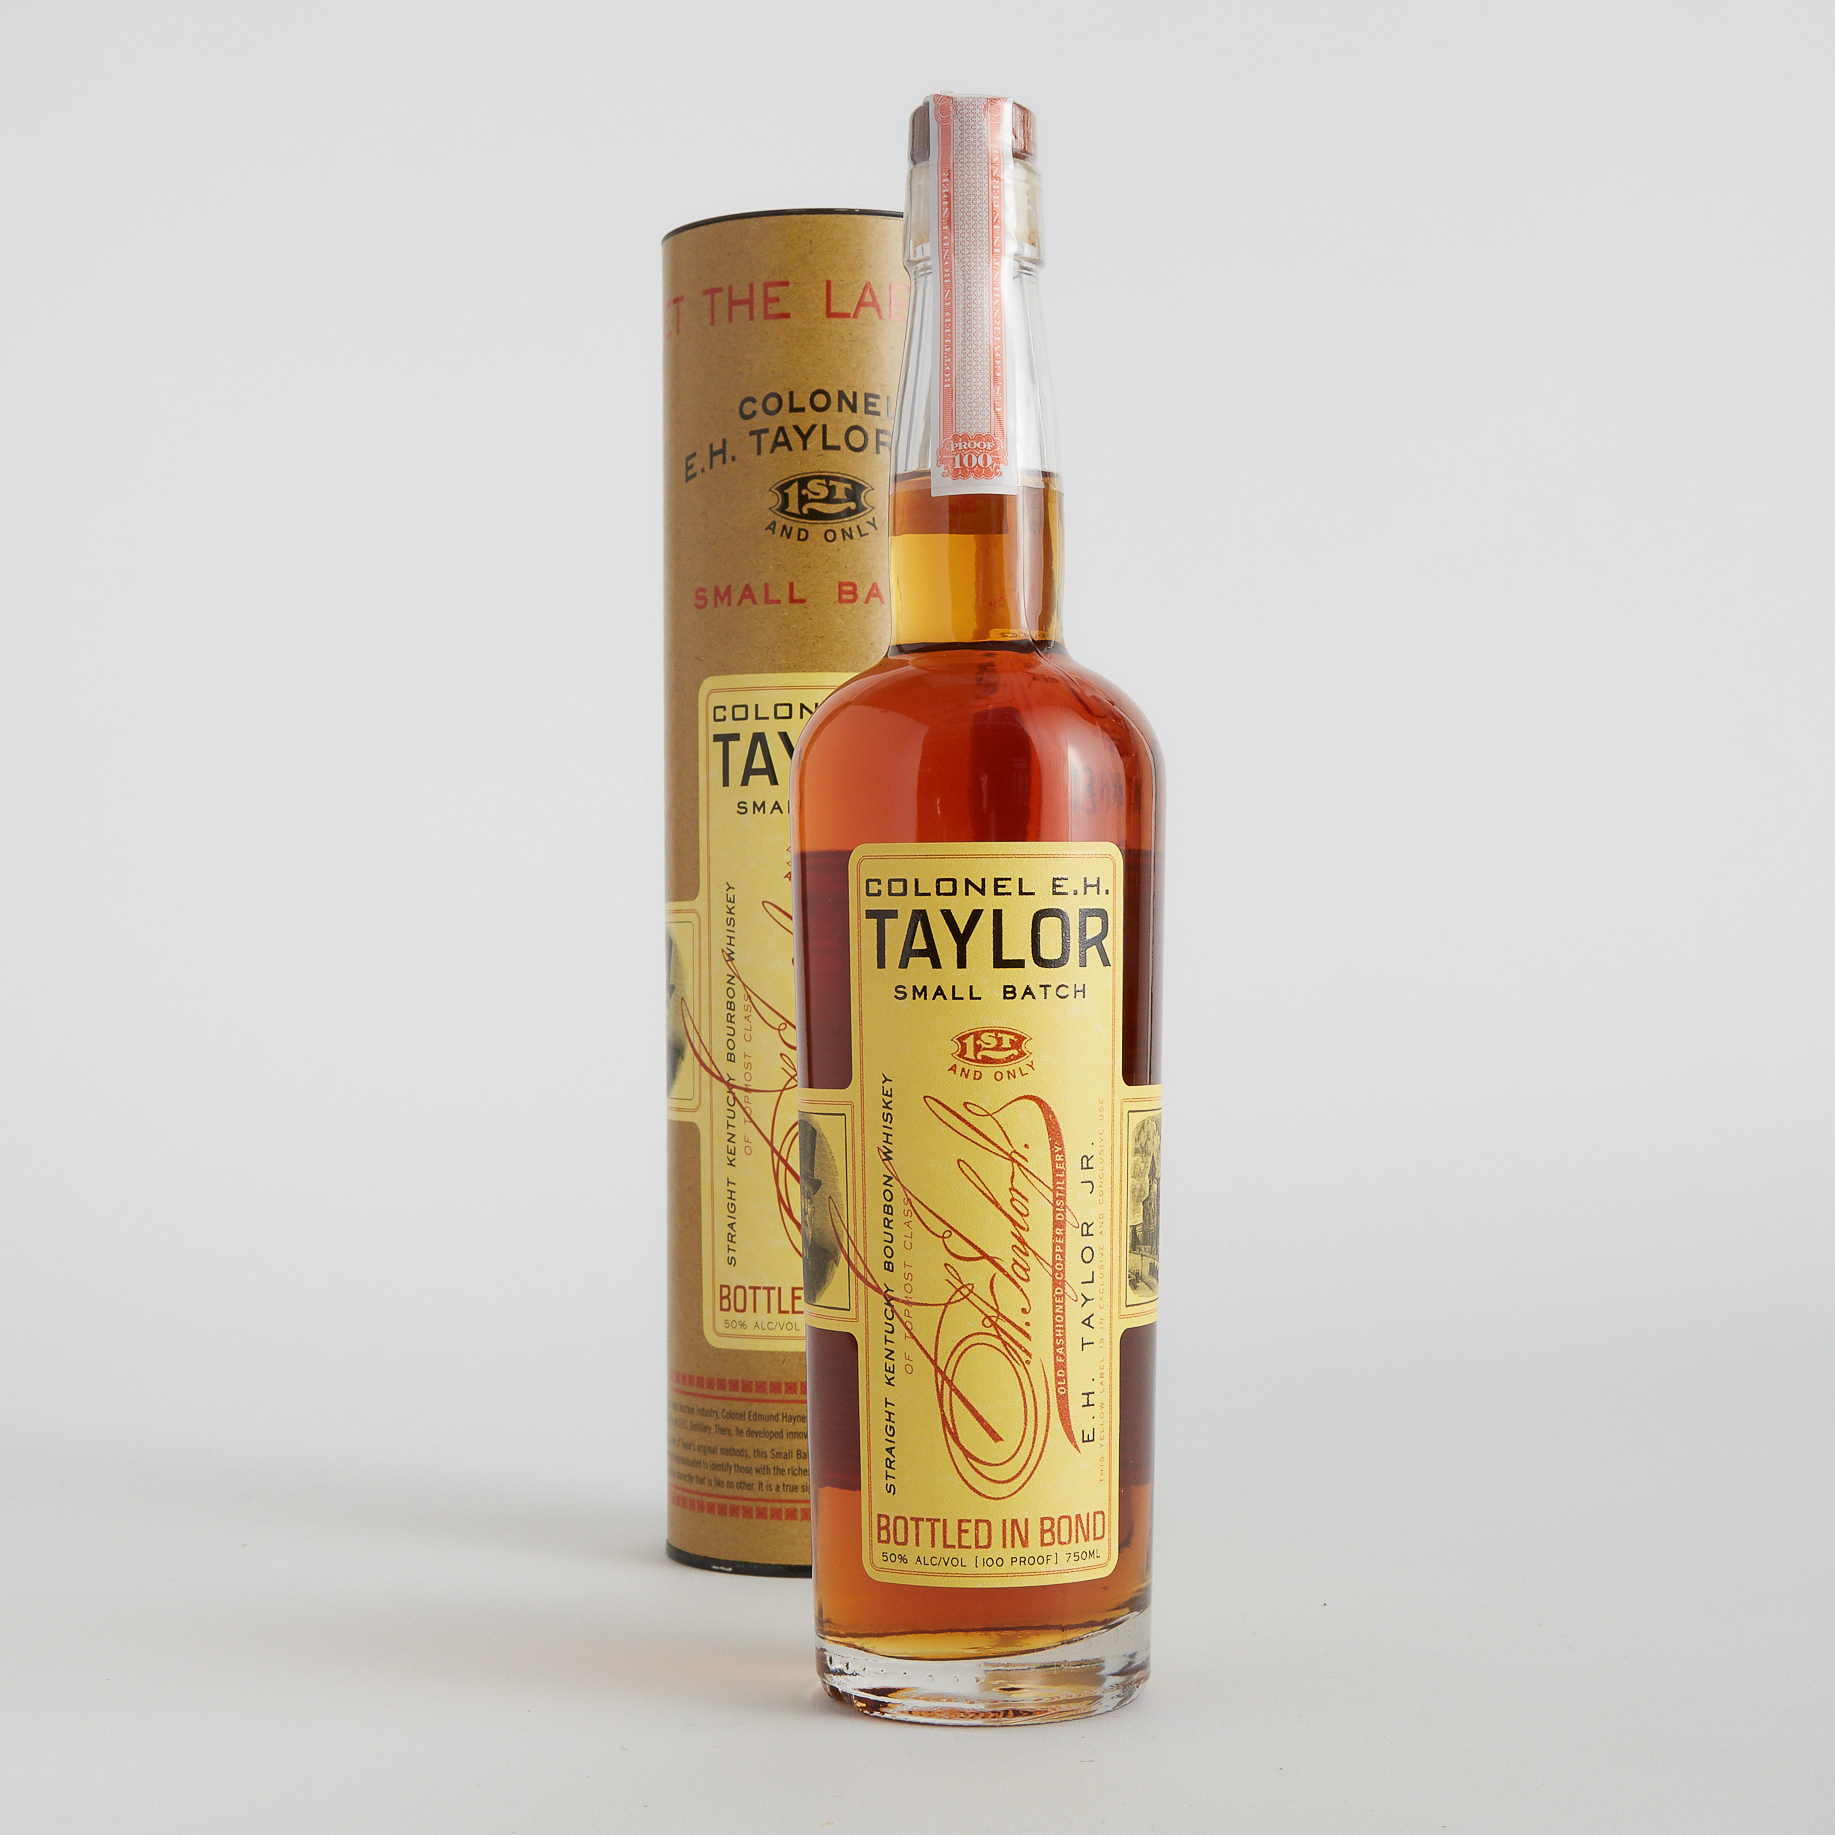 COLONEL E.H.TAYLOR JR. SMALL BATCH STRAIGHT KENTUCKY BOURBON WHISKEY NAS (ONE 750 ML)